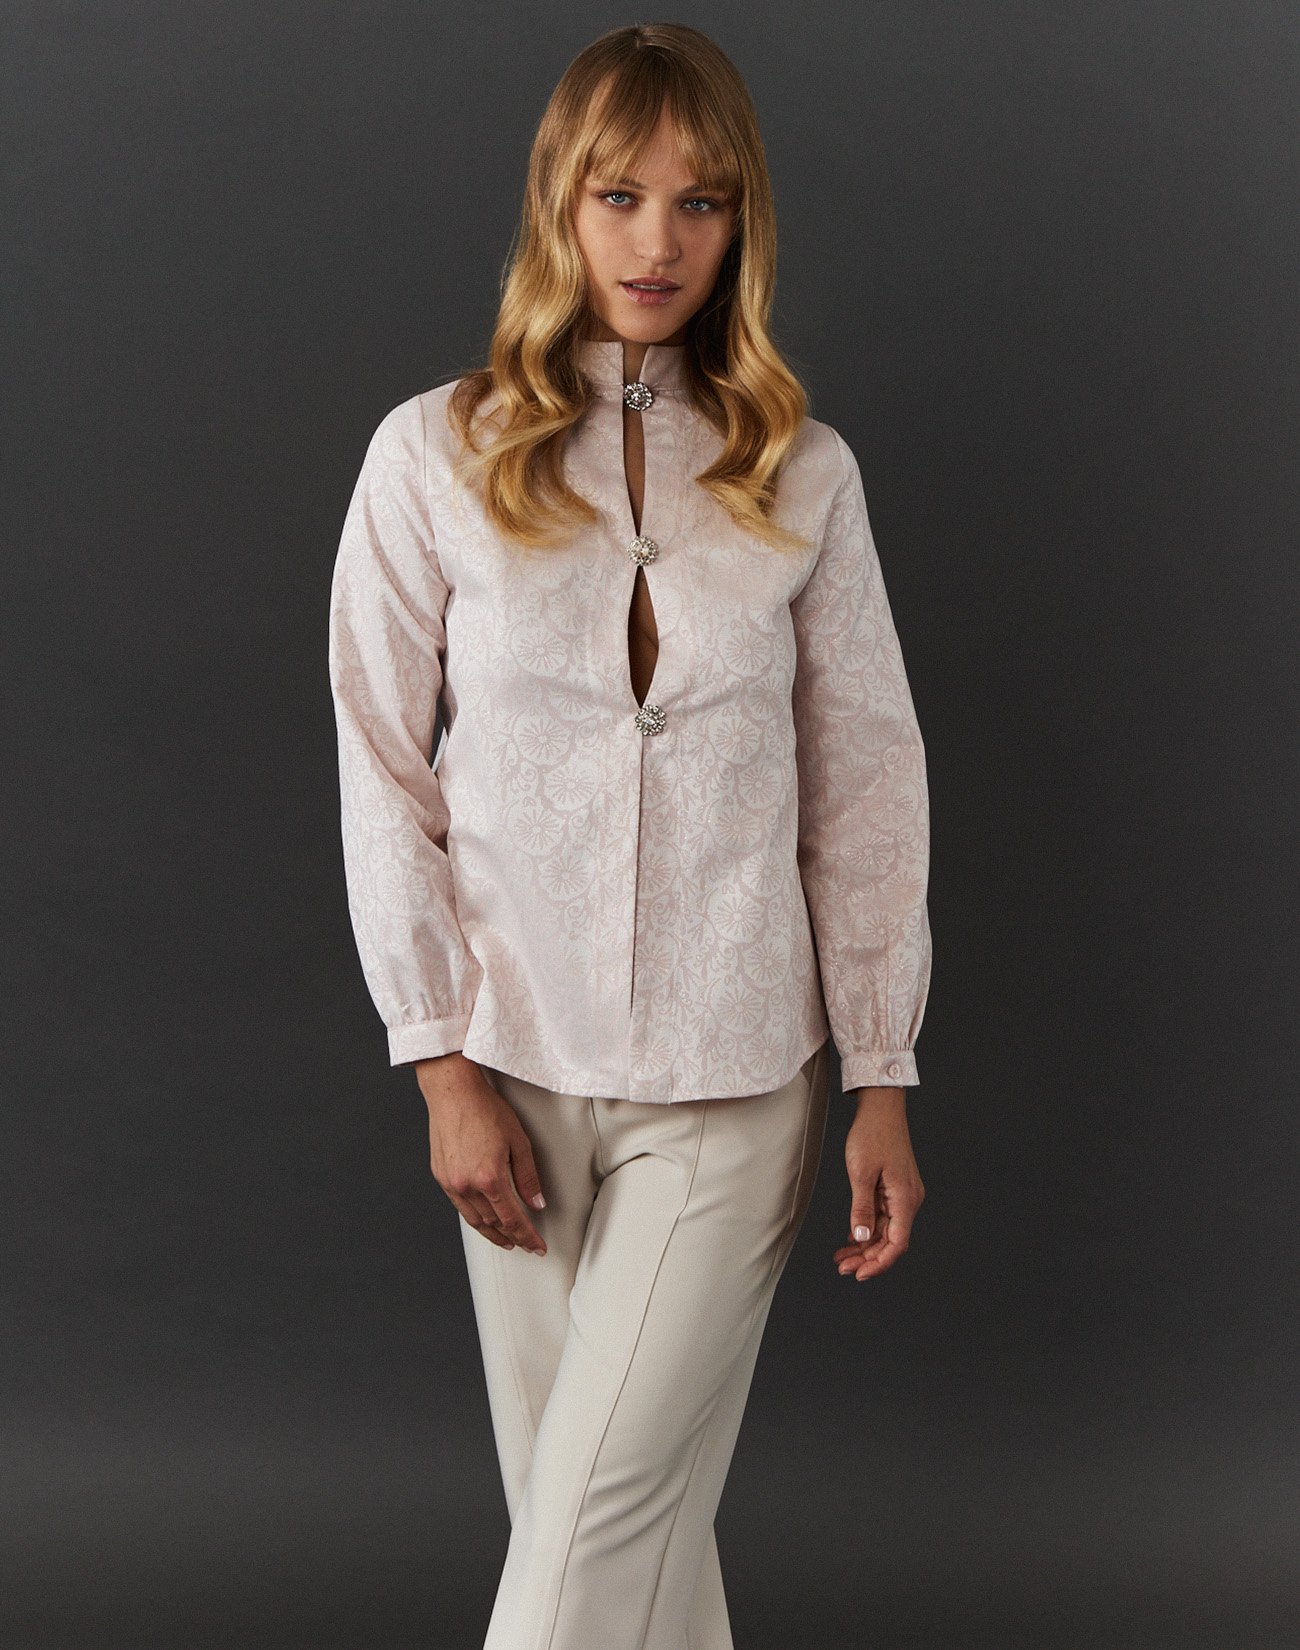 Jacquard blouse with jewel detail